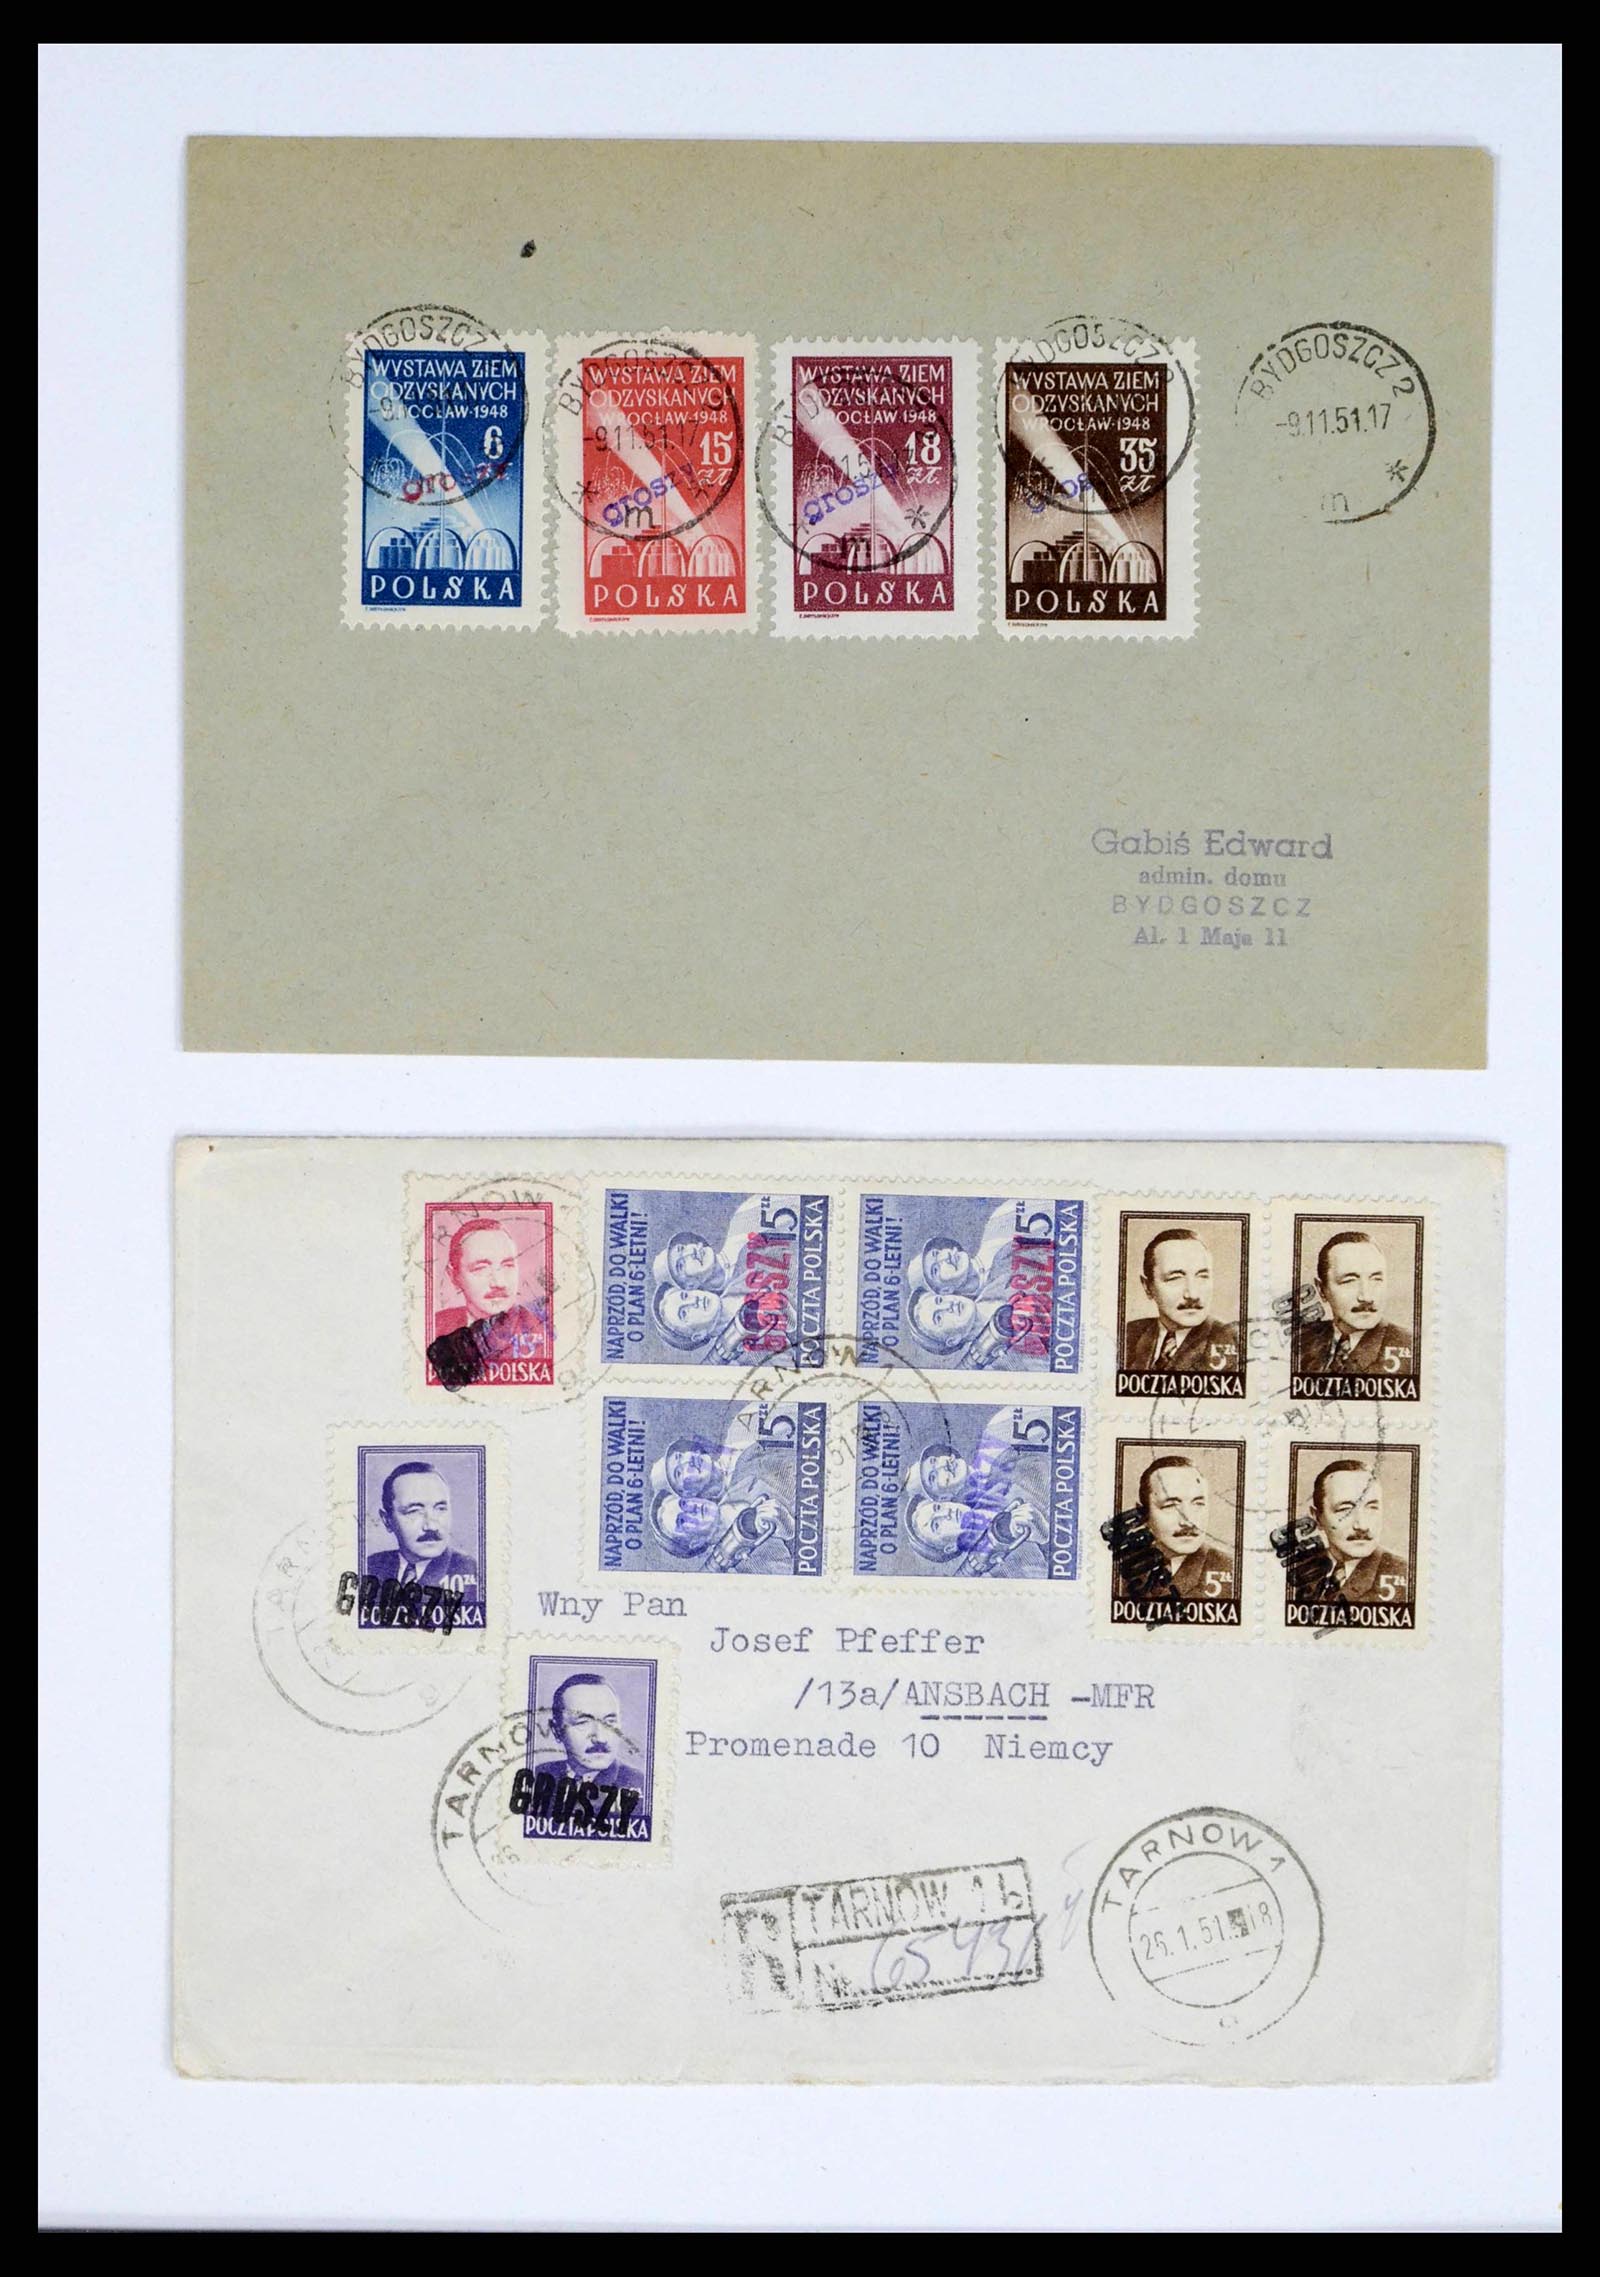 38201 0025 - Stamp collection 38201 Groszy overprints on cover 1950-1951.